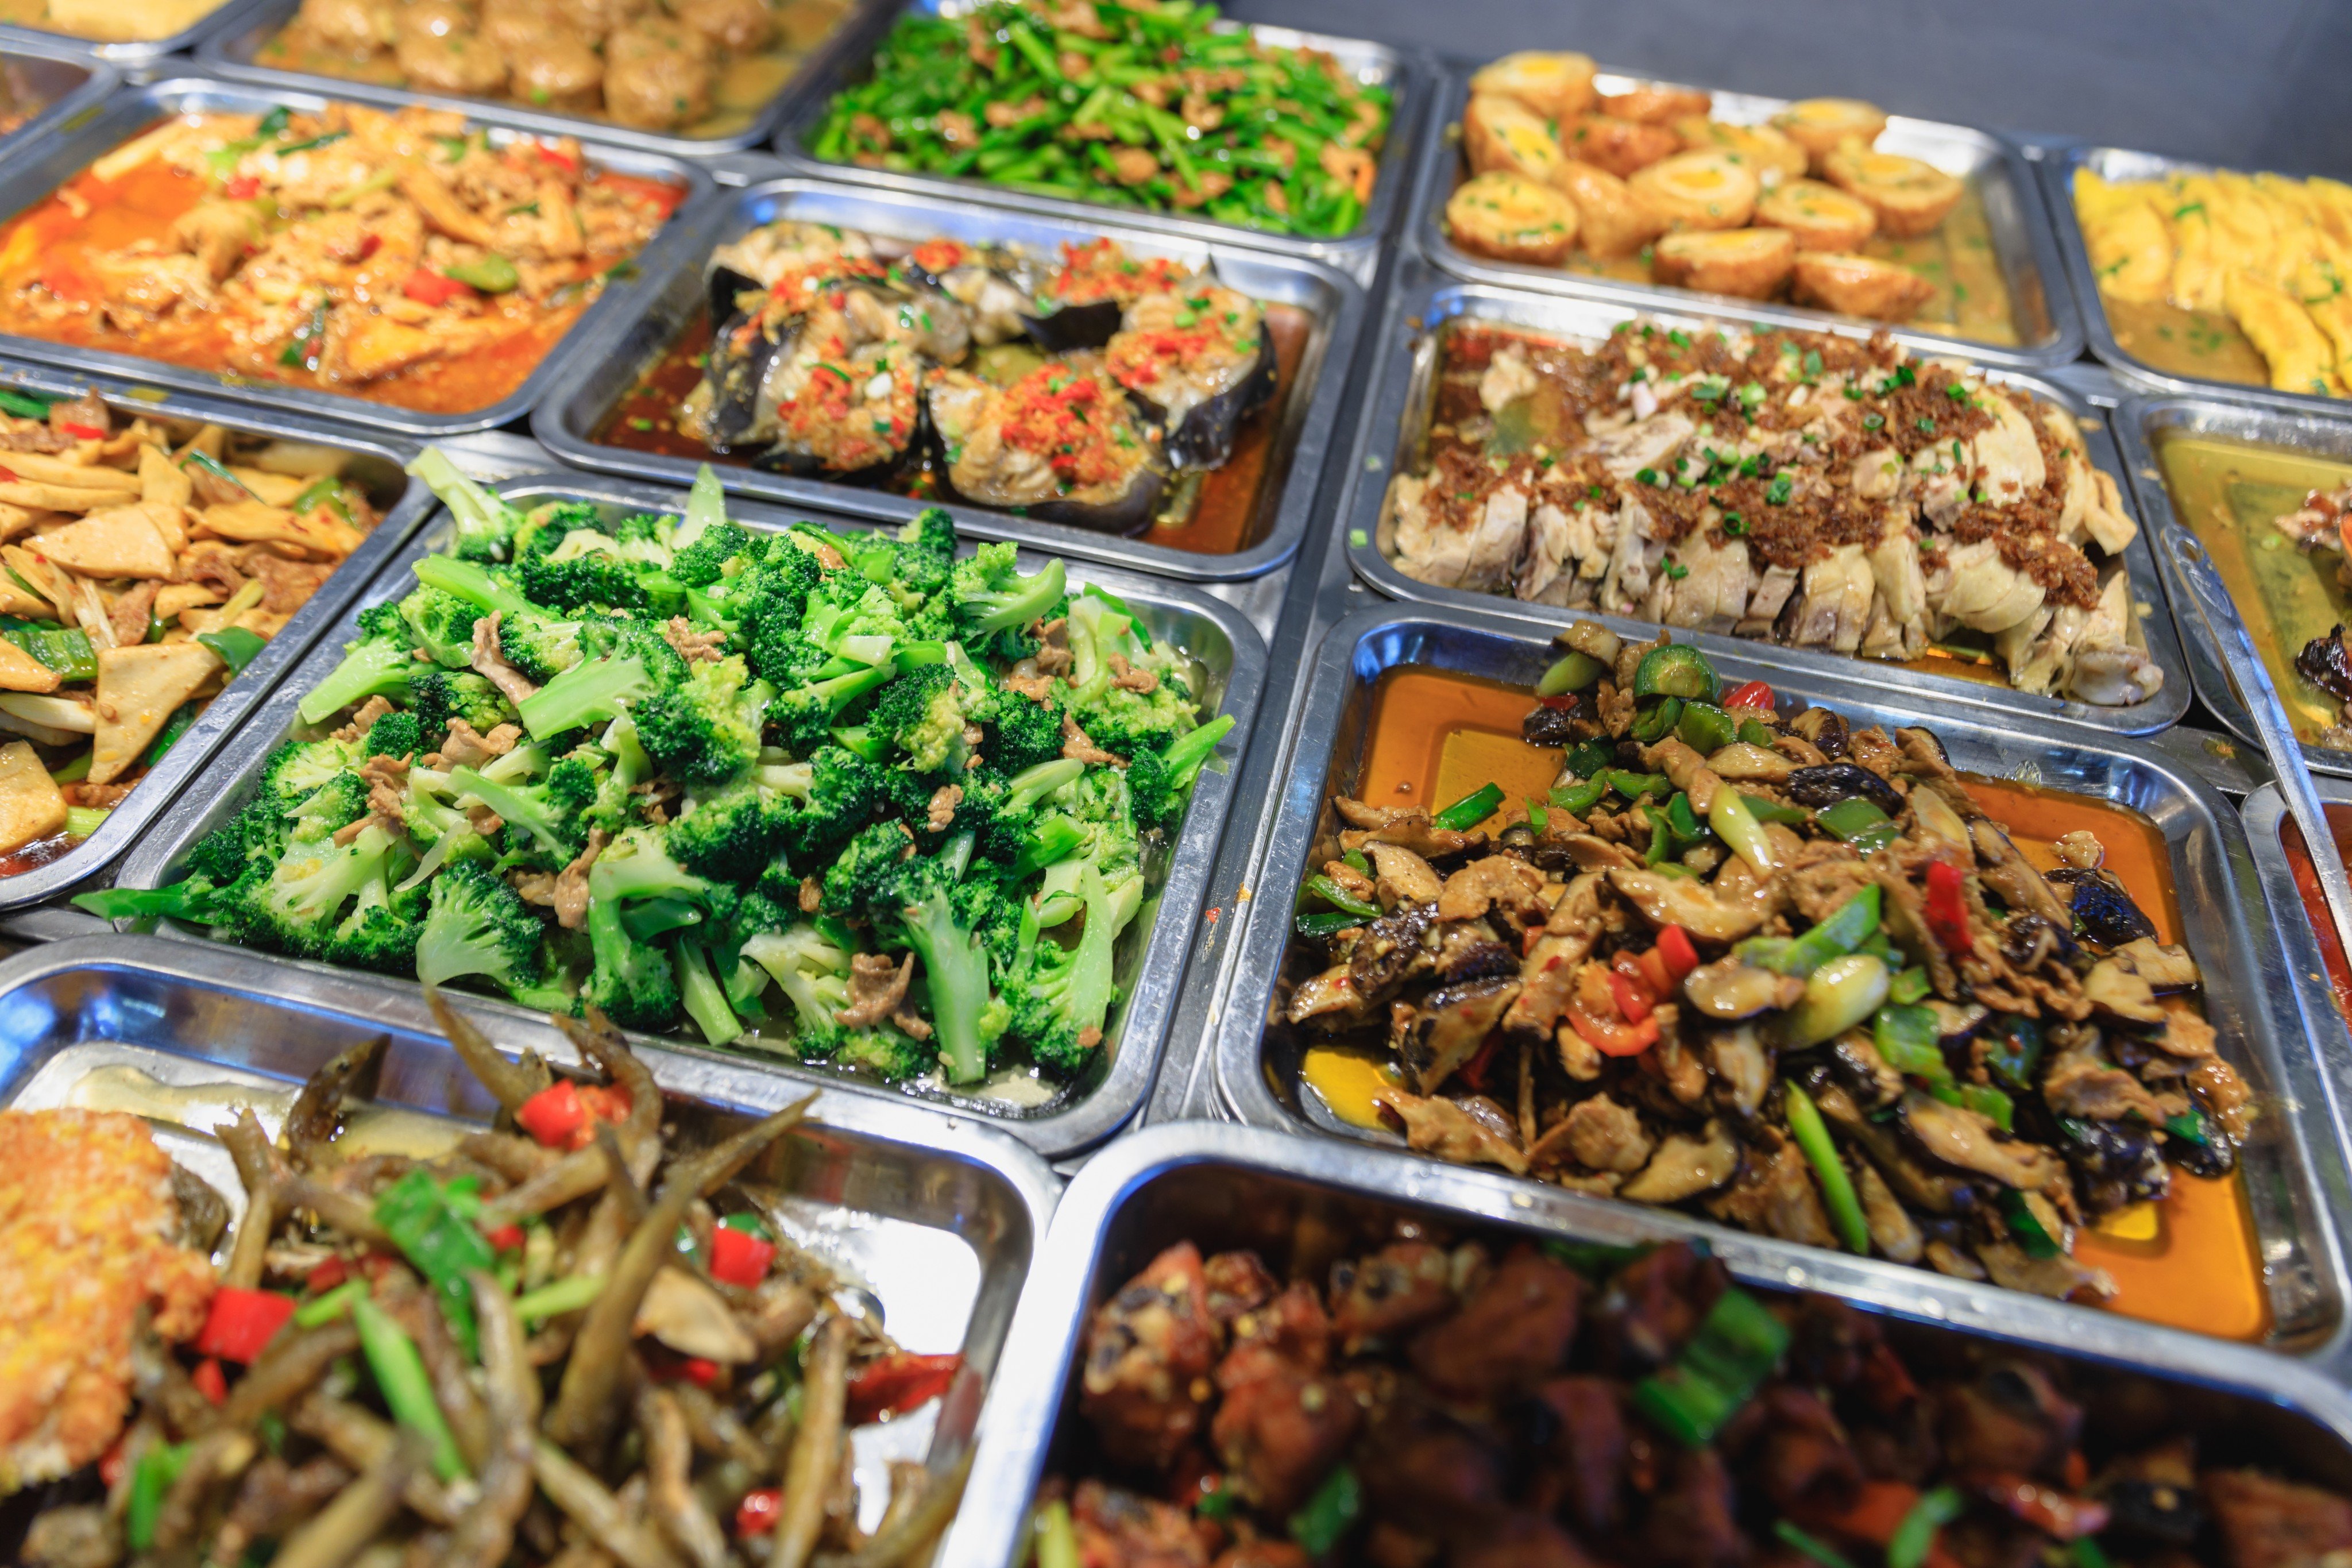 A buffet at a Chinese restaurant. Chinese-style buffets first emerged in the West in the mid-20th century, starting with the famed Chang’s Restaurant in California. Photo: Shutterstock